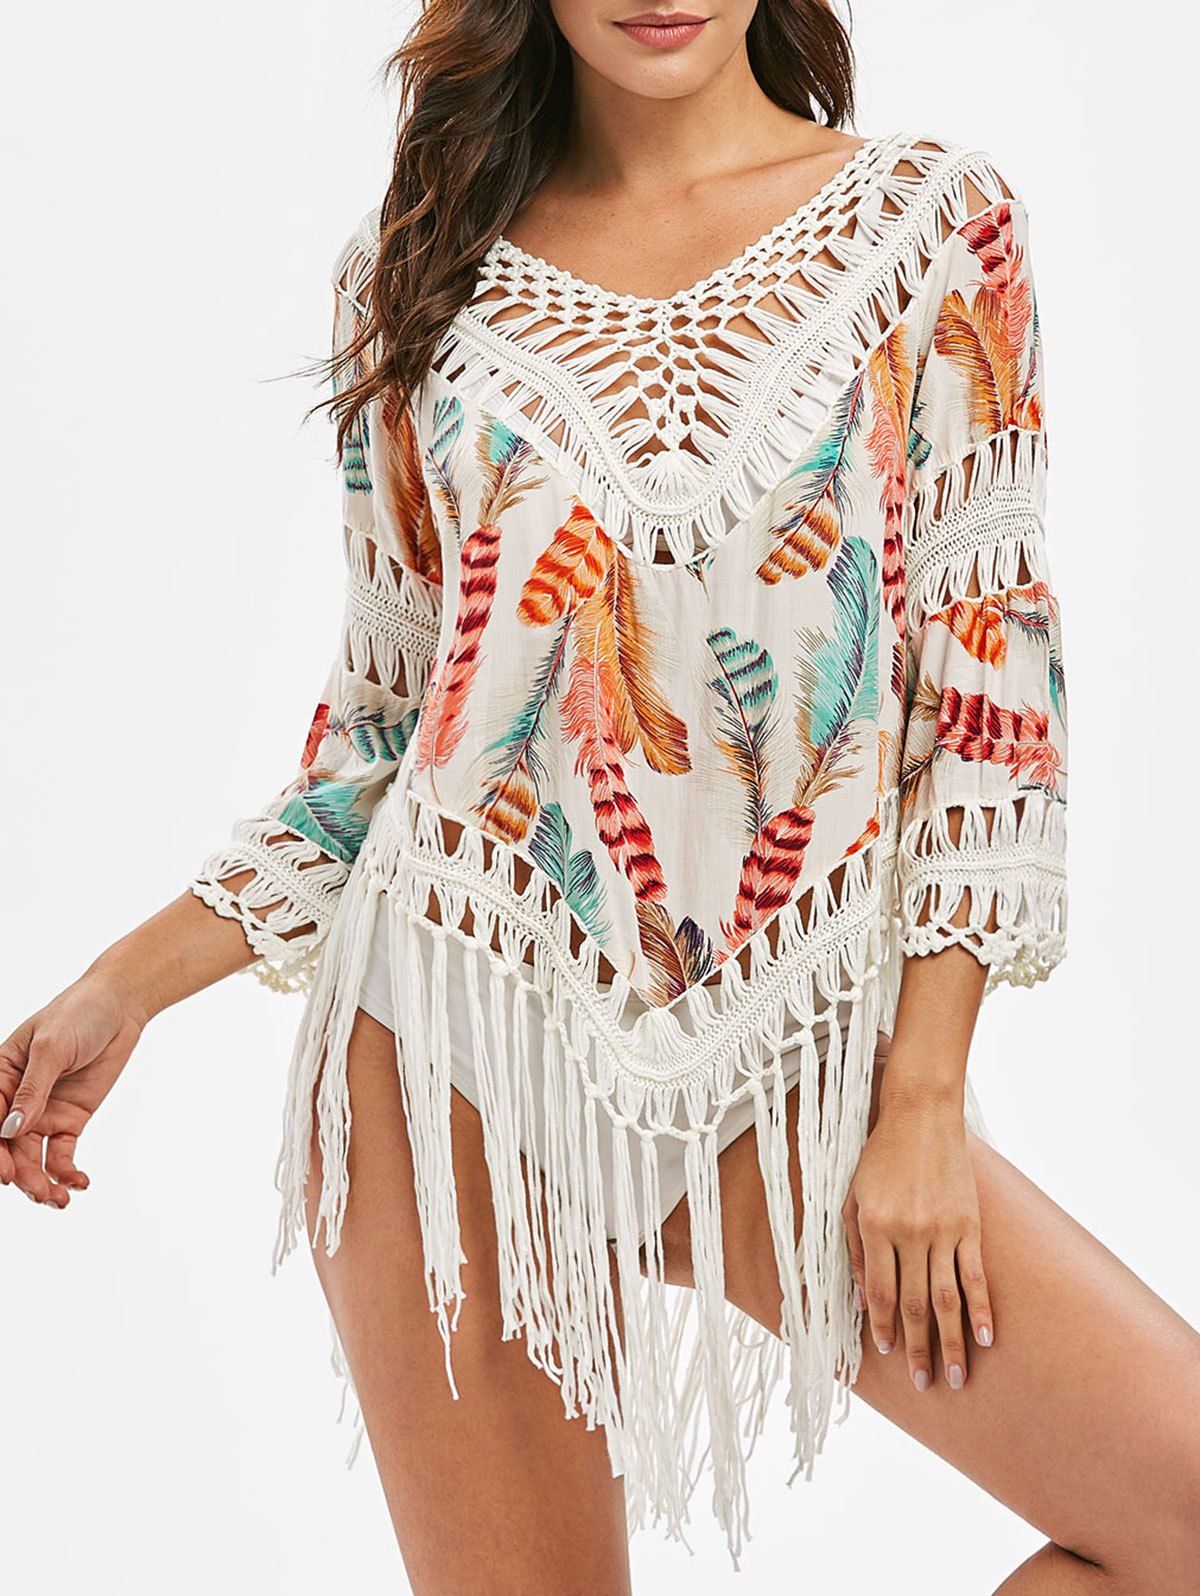 Fringed Crochet Panel Feather Print Cover-up - multicolor ONE SIZE